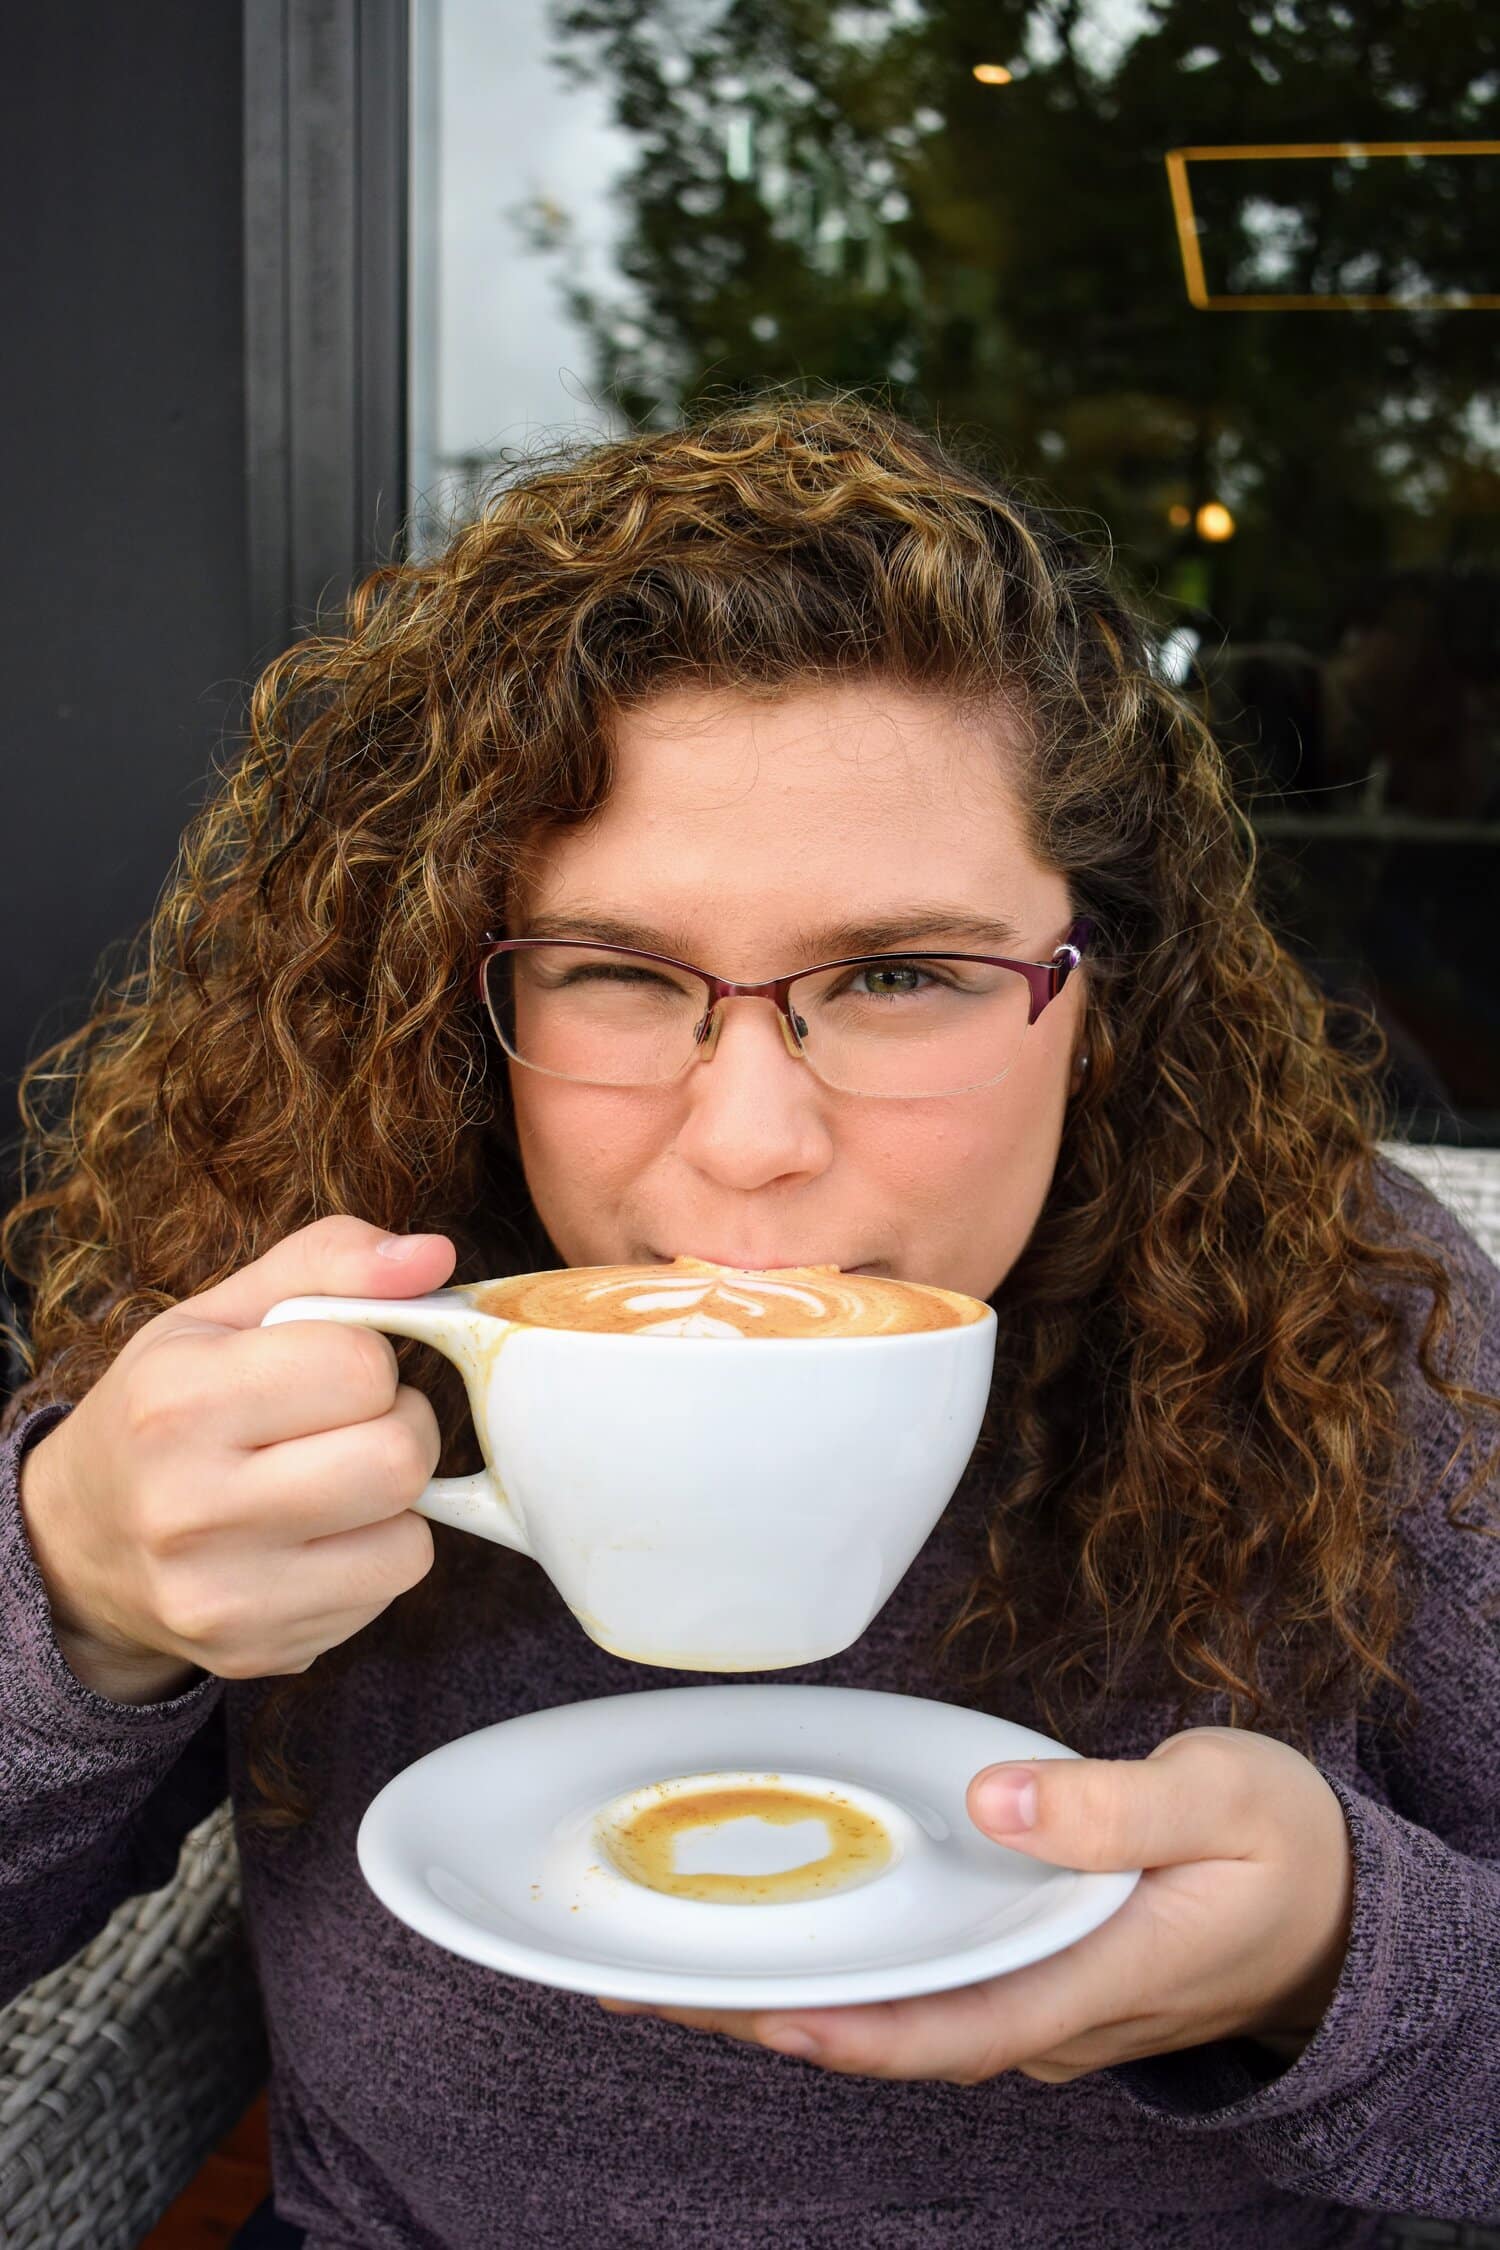 We have to start off with the classic pumpkin spice latte. Savannah Williamson, freshman, enjoying a cup of this popular fall treat.